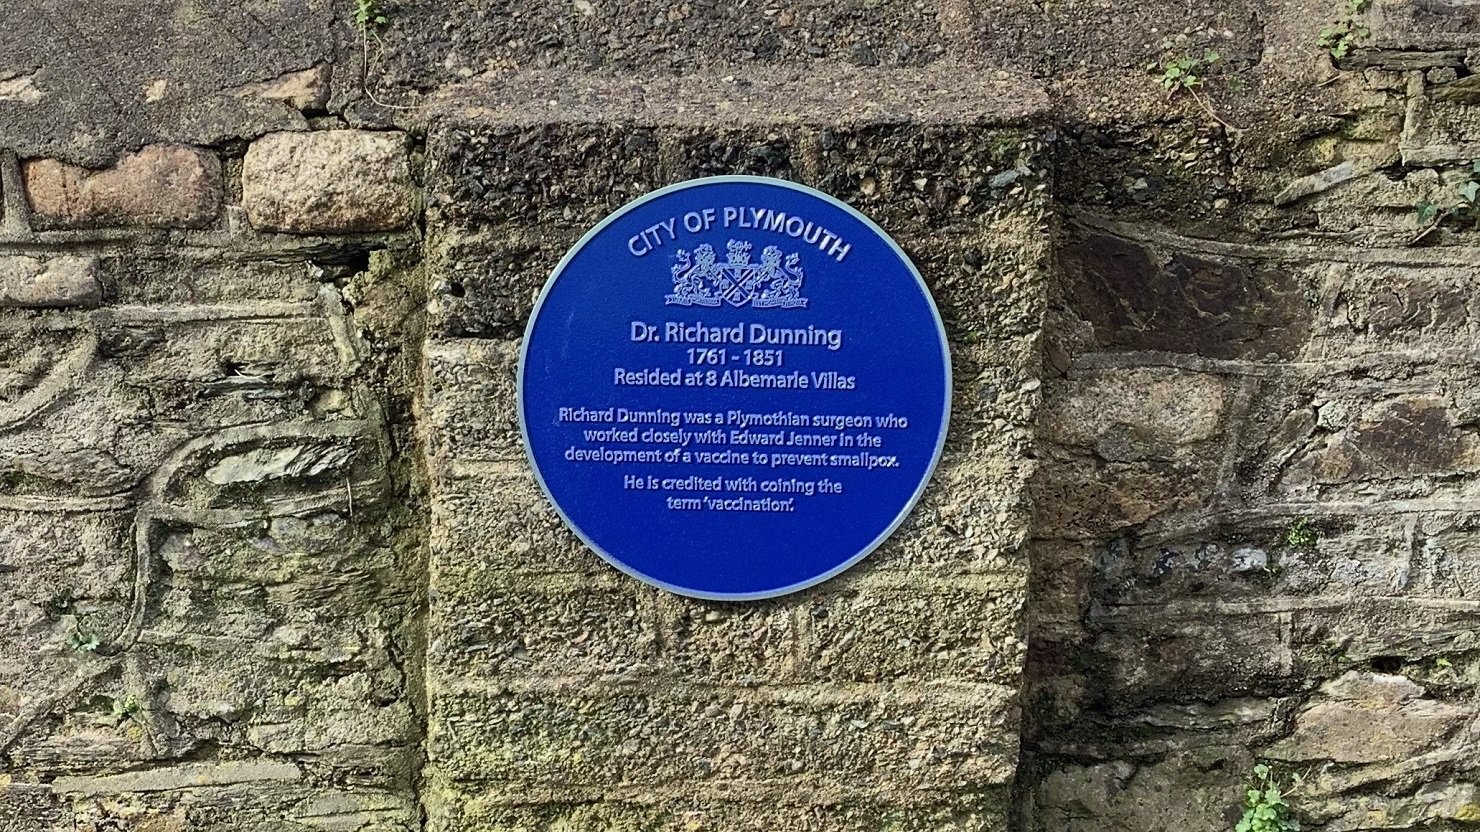 New blue plaque commemorates ground breaking Plymouth surgeon | The Box Plymouth